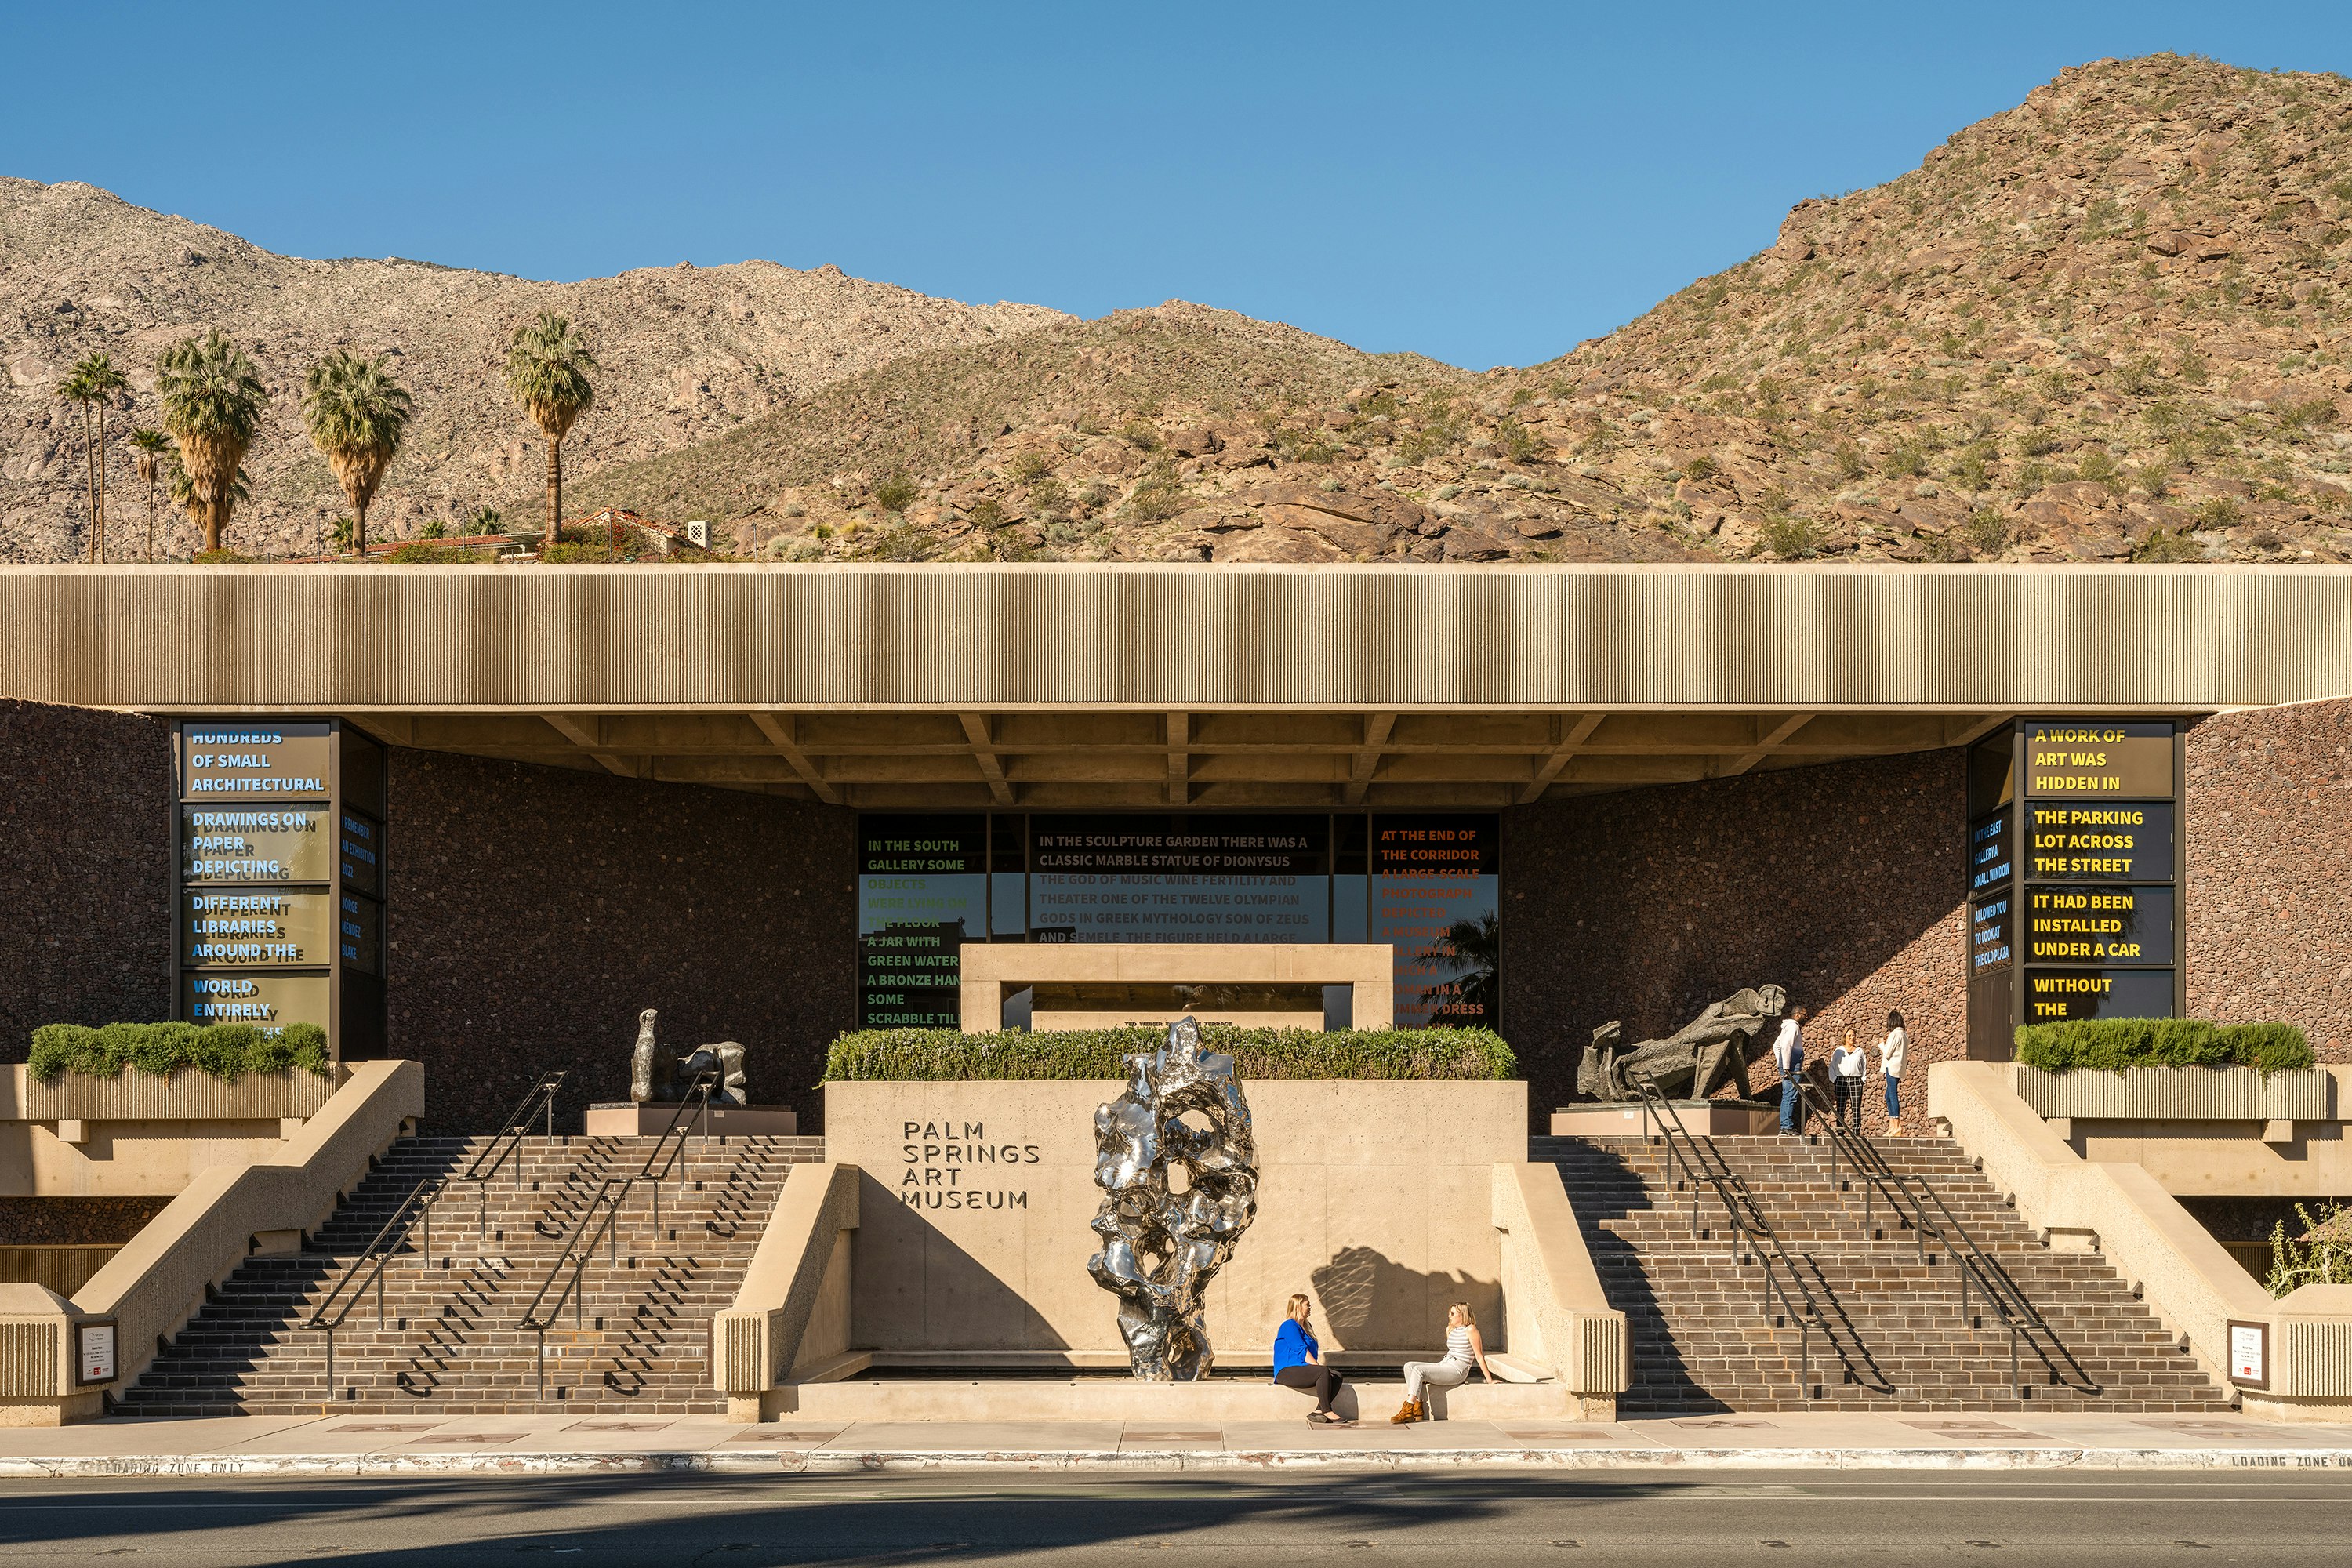 A photograph of a beige-colored, low, mid-century modern building with steps leading up to the front. Brown desert hills rise behind it.